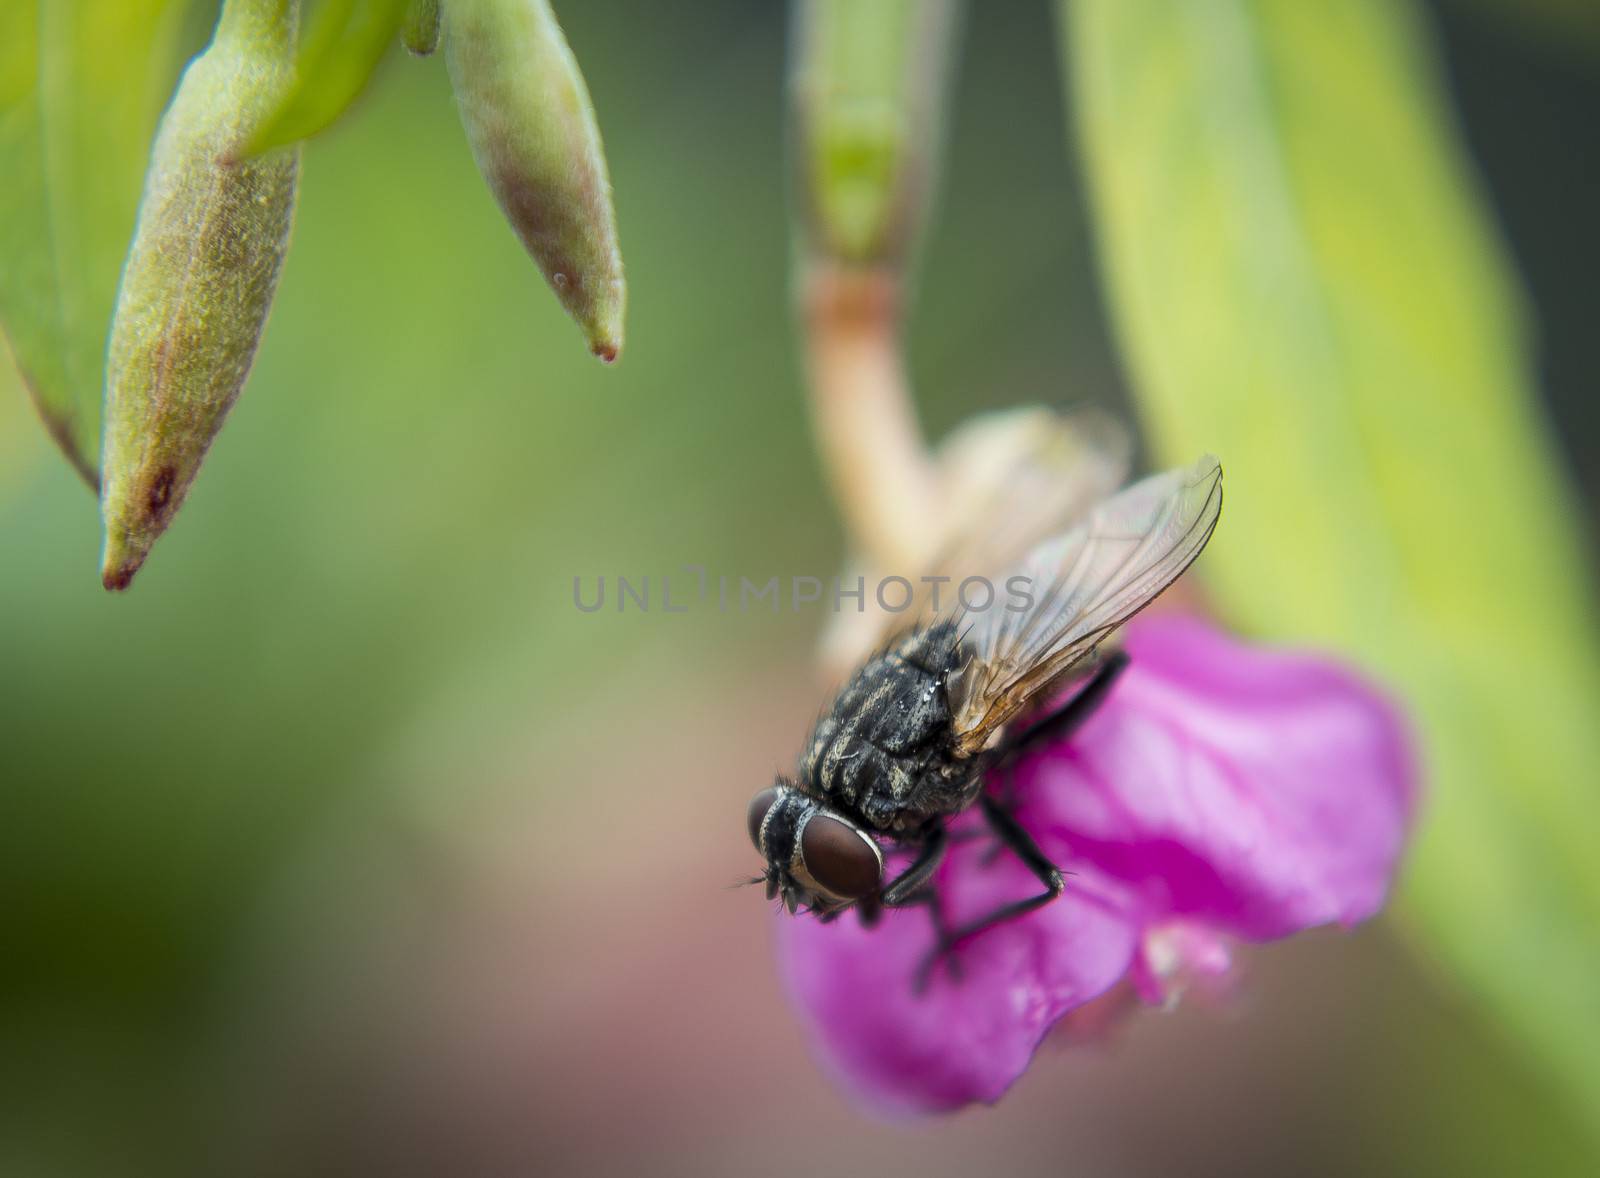 Fly On Flower by Camello2000